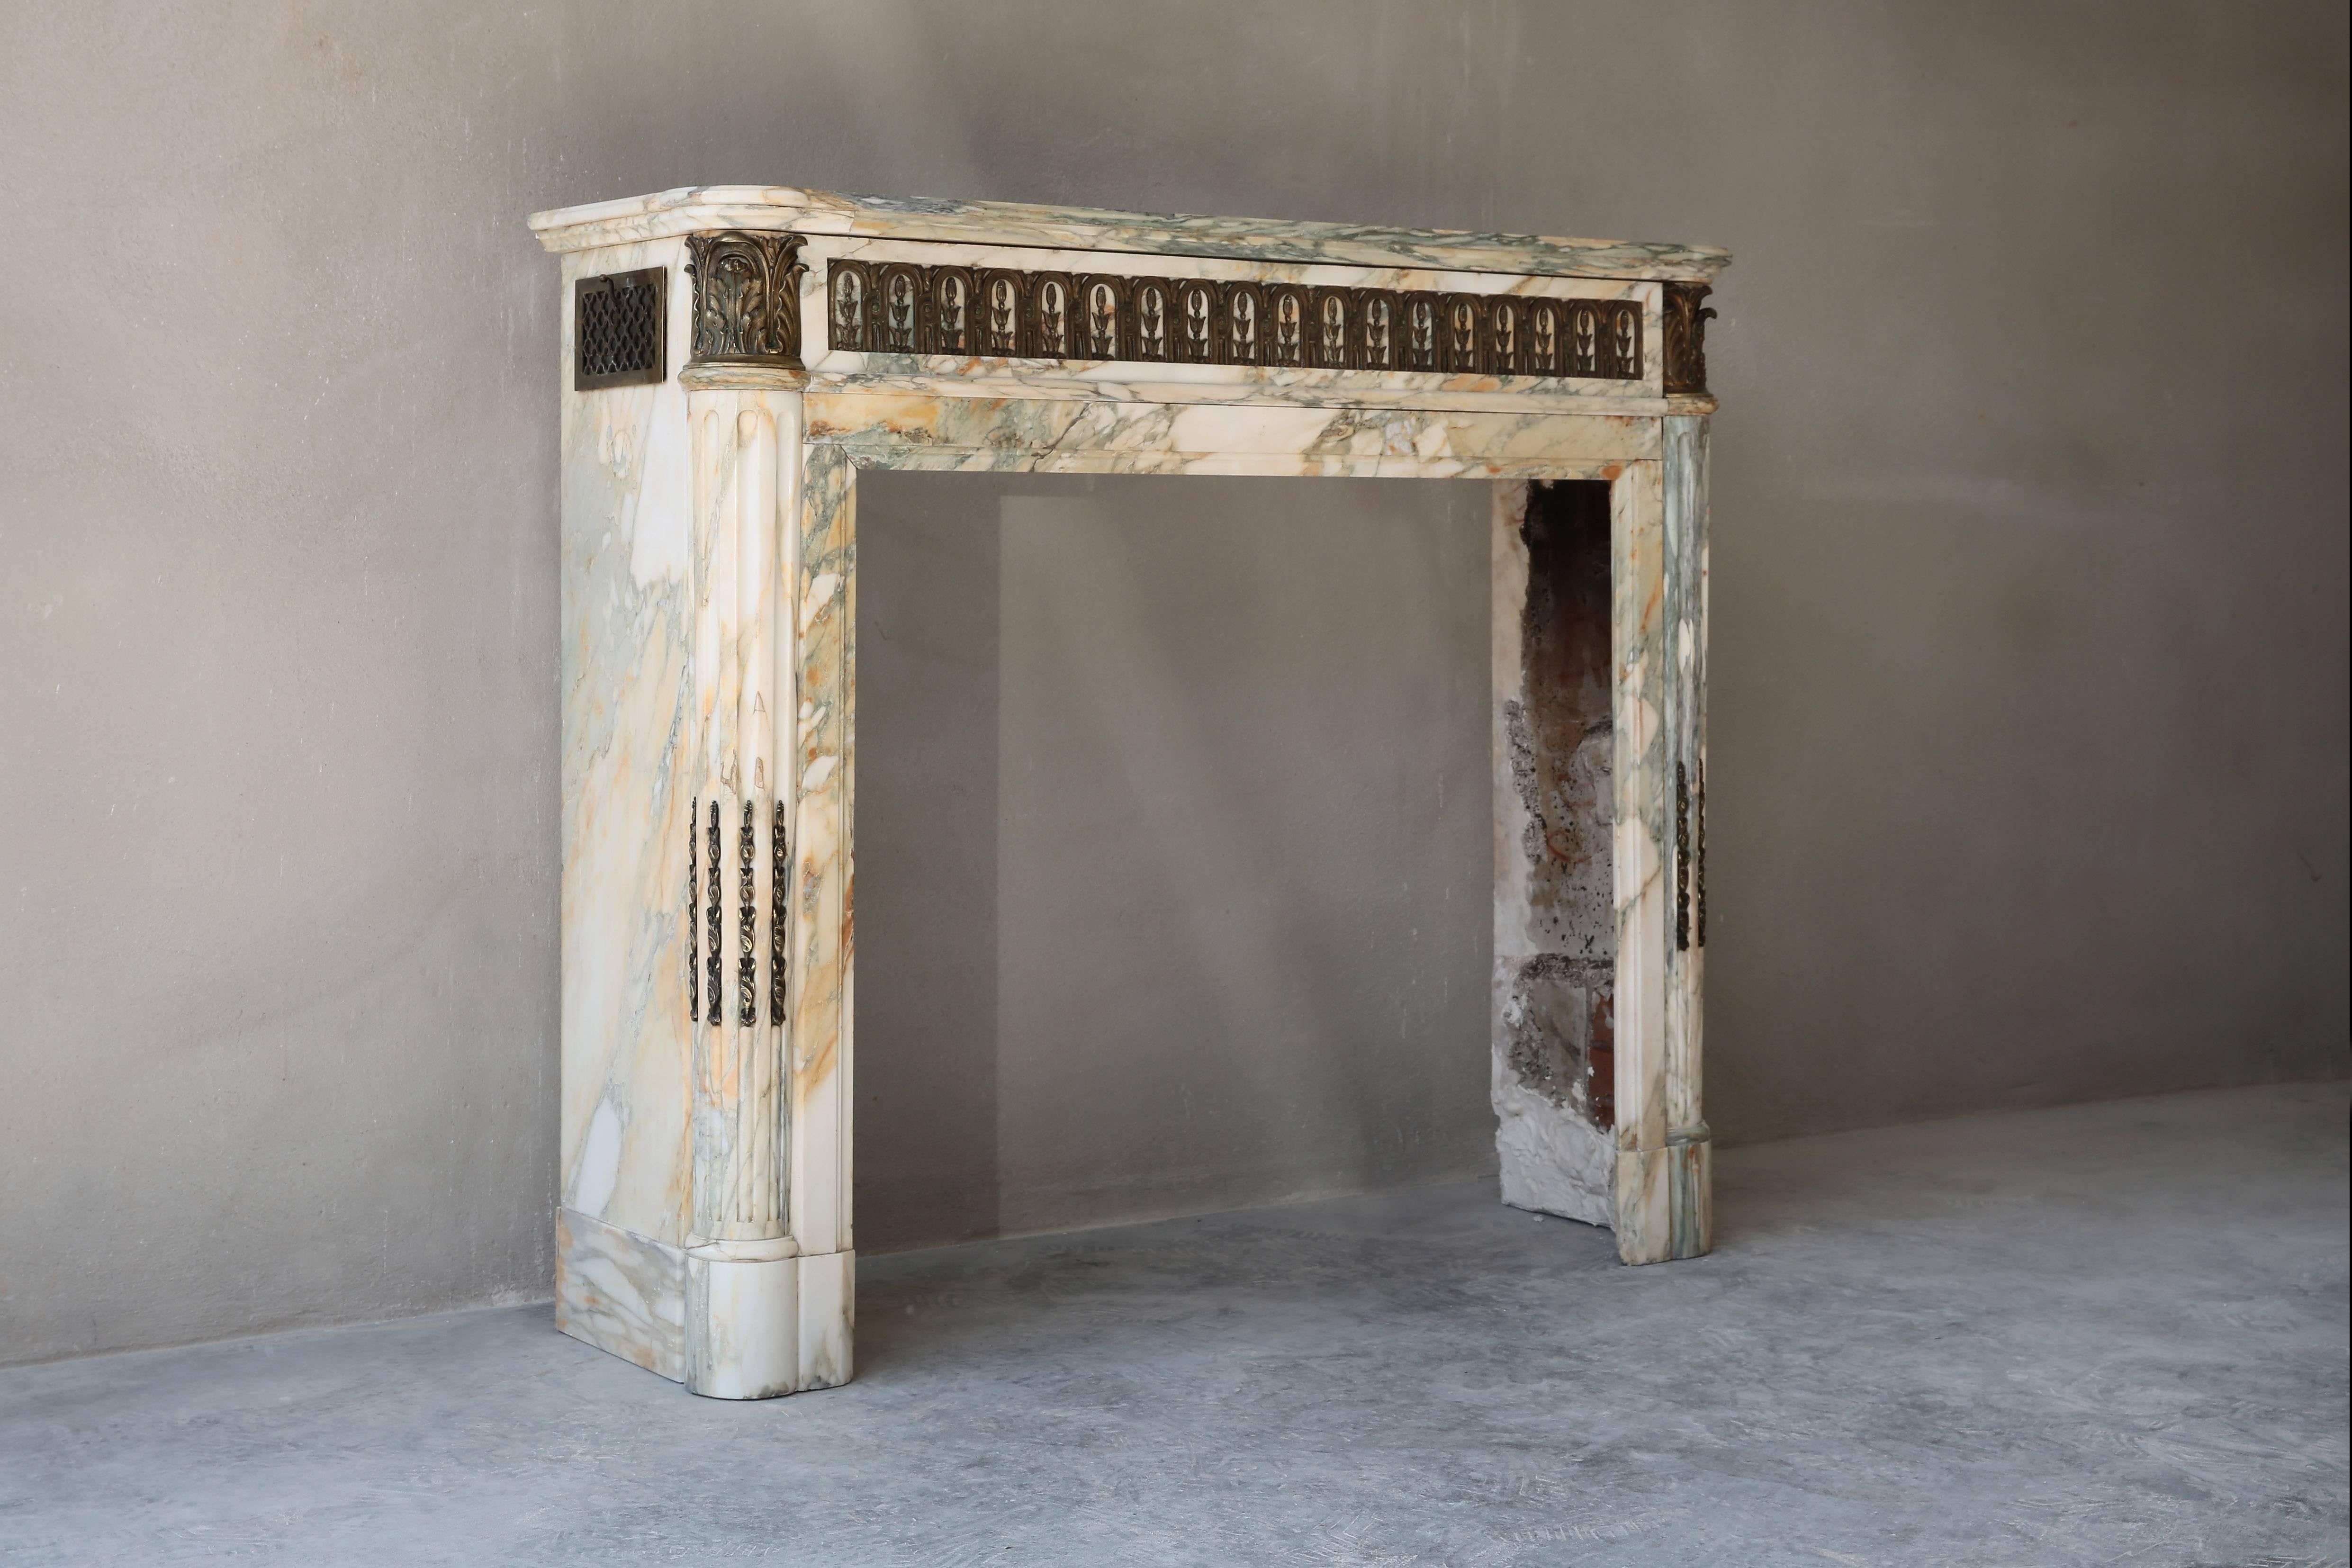 This special and unique antique marble fireplace comes from Paris and dates back to the 19th century. In the time of Louis XVI these chimneys were common. The mantelpiece is richly decorated with ornaments and gilded bronze decorations in the fringe